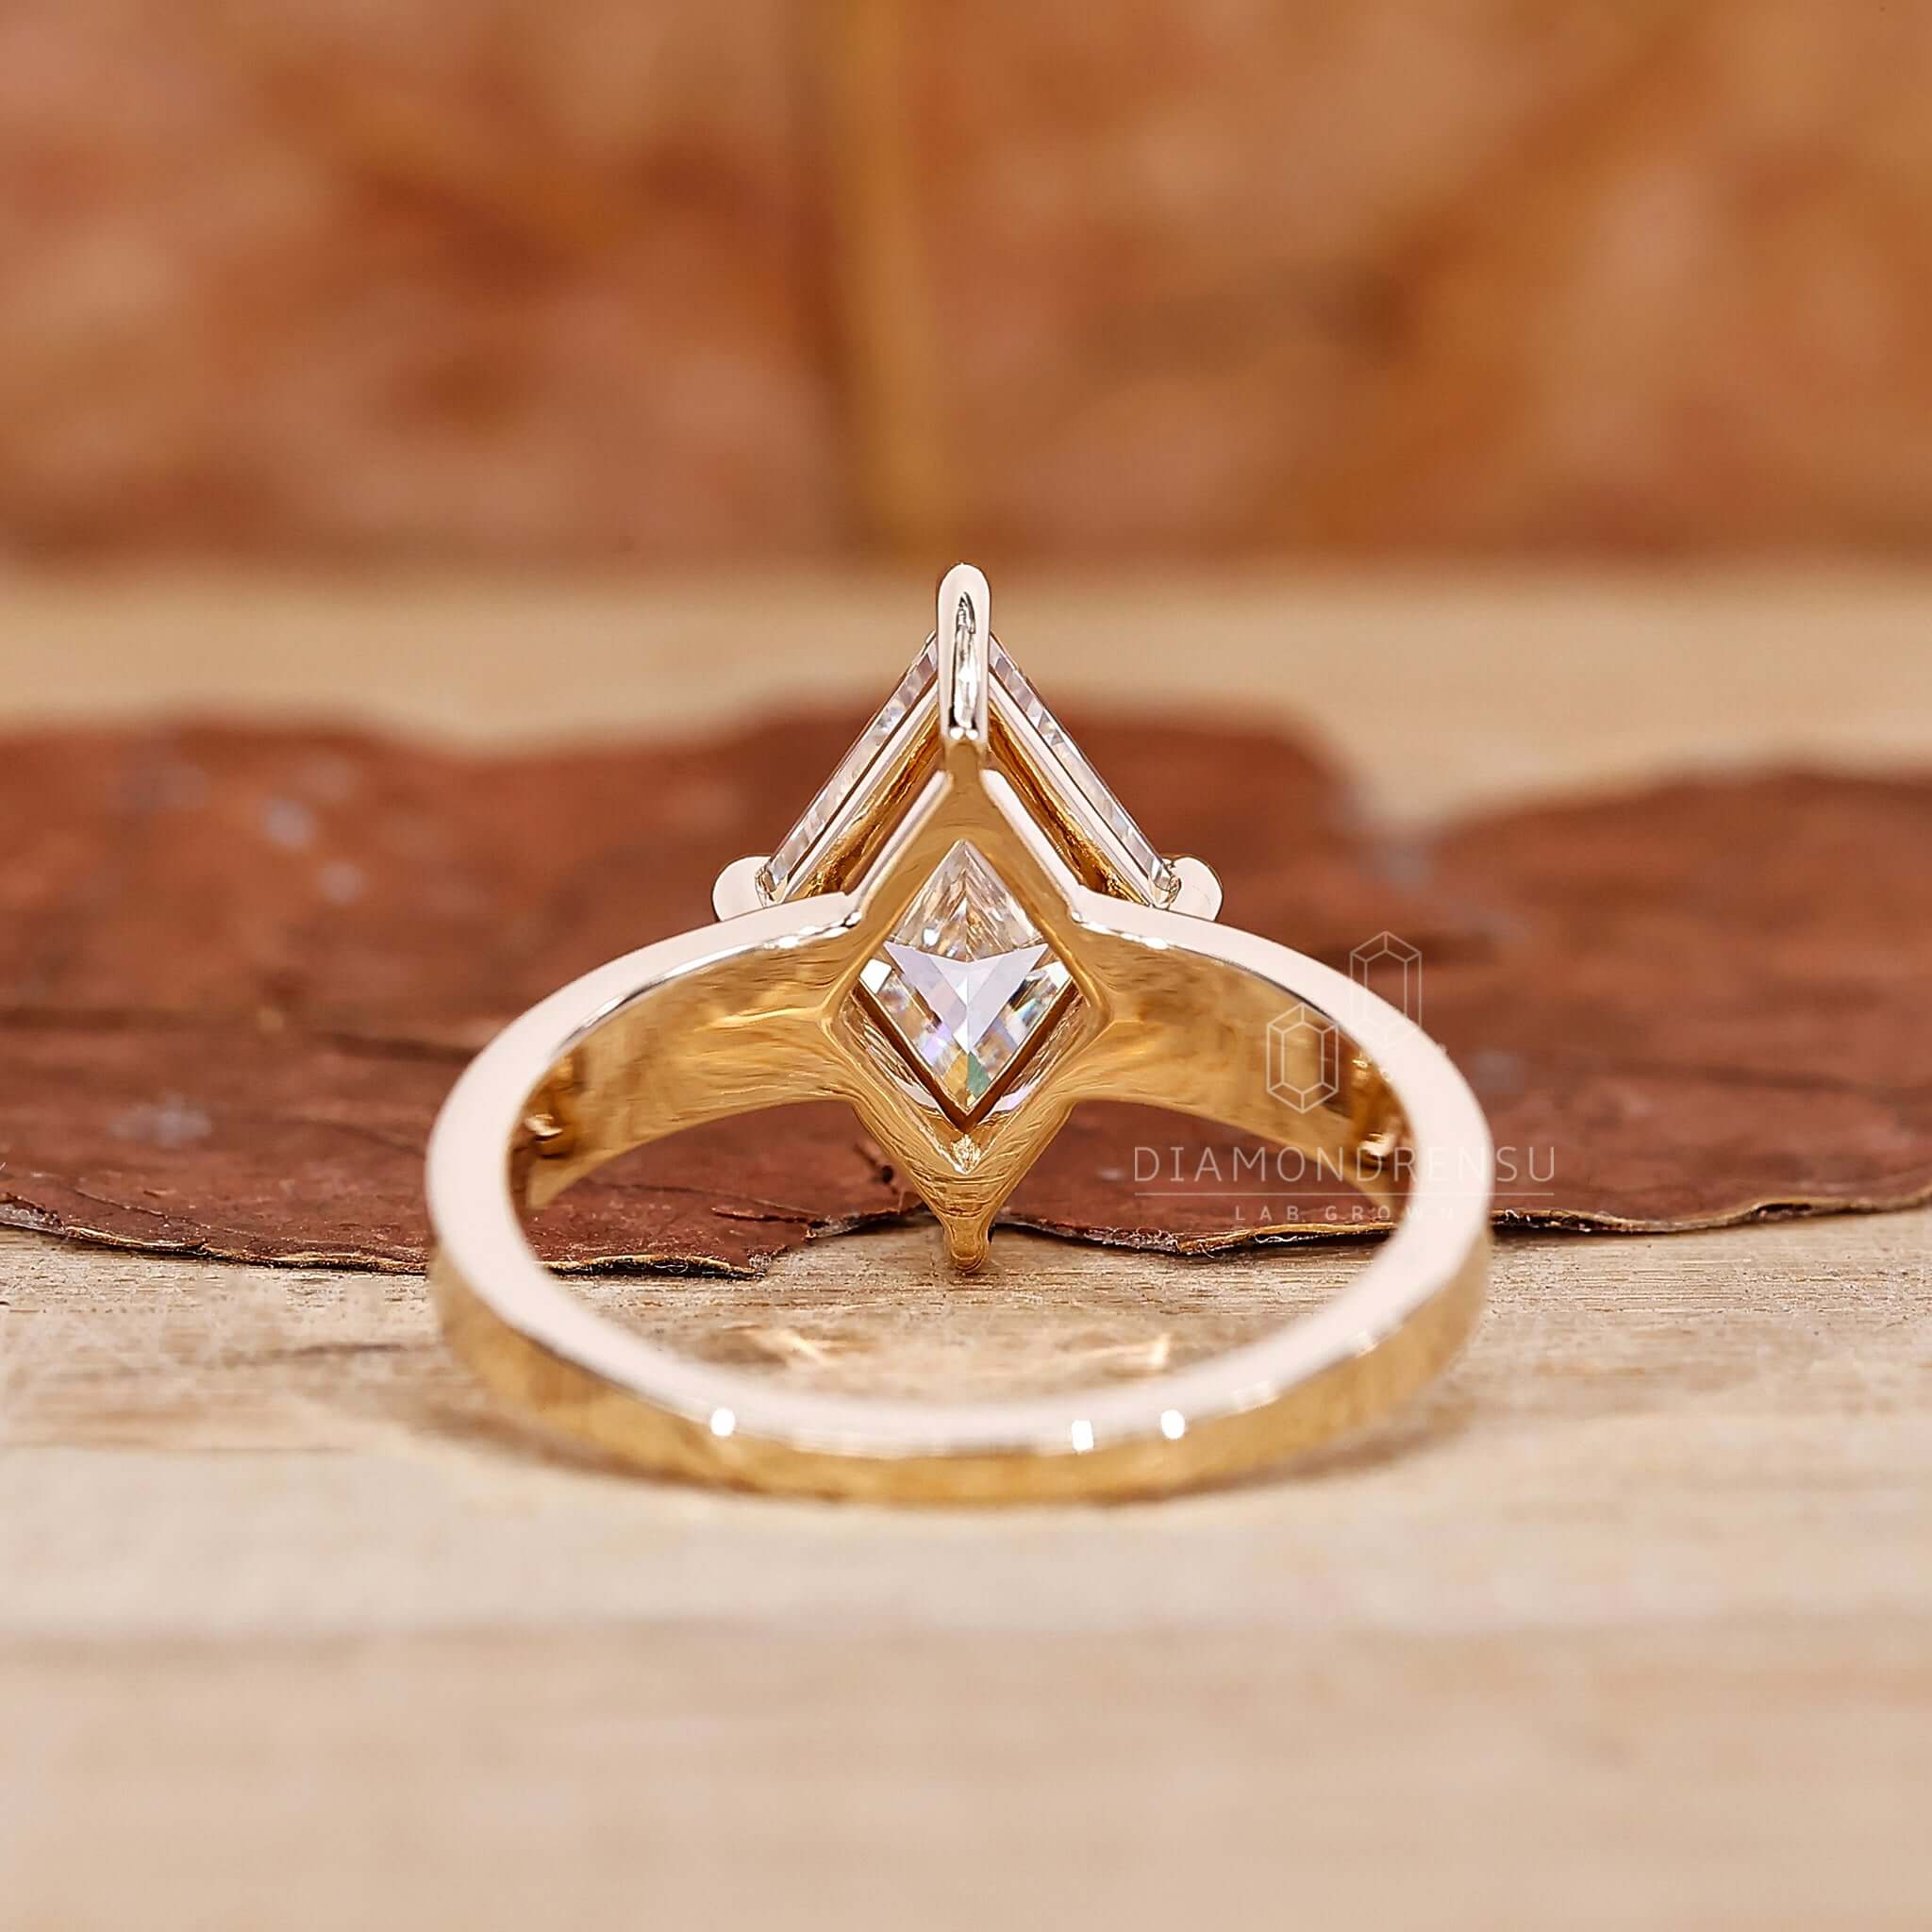 A side profile shot of a gold engagement ring adorned with a captivating lozenge cut diamond, symbolizing eternal love and commitment.